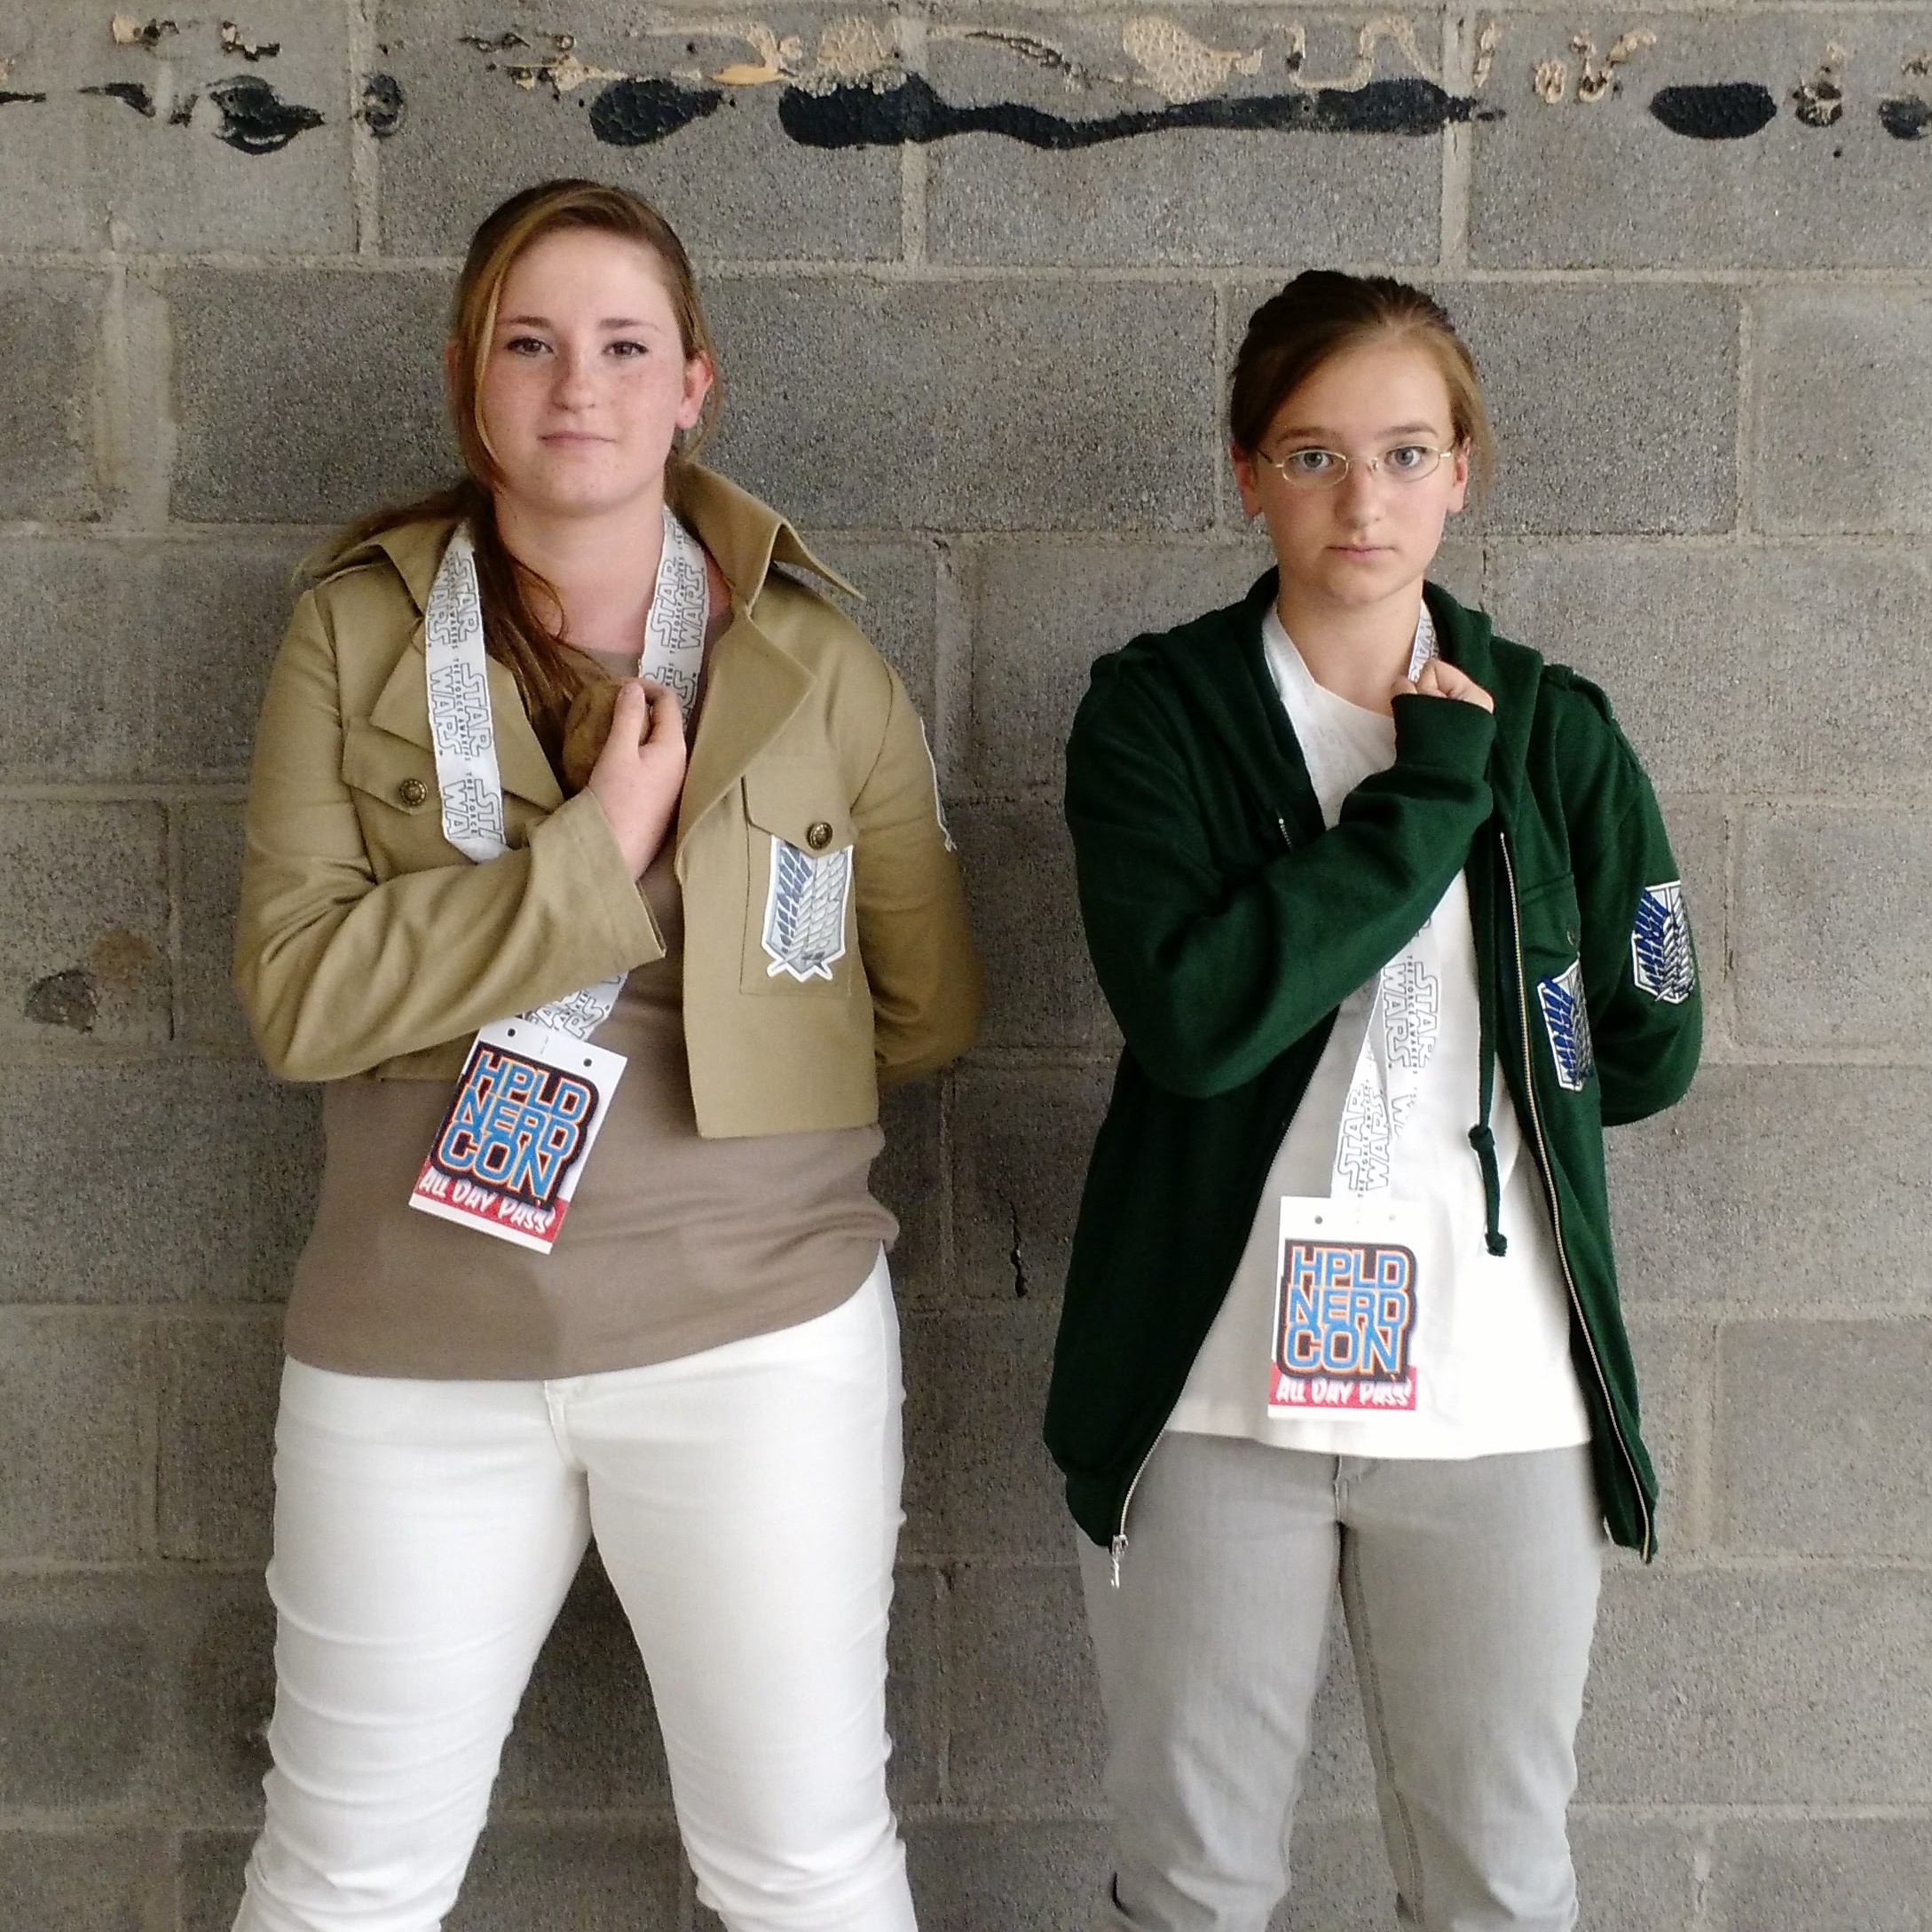 Cosplaying characters from Attack on Titan.